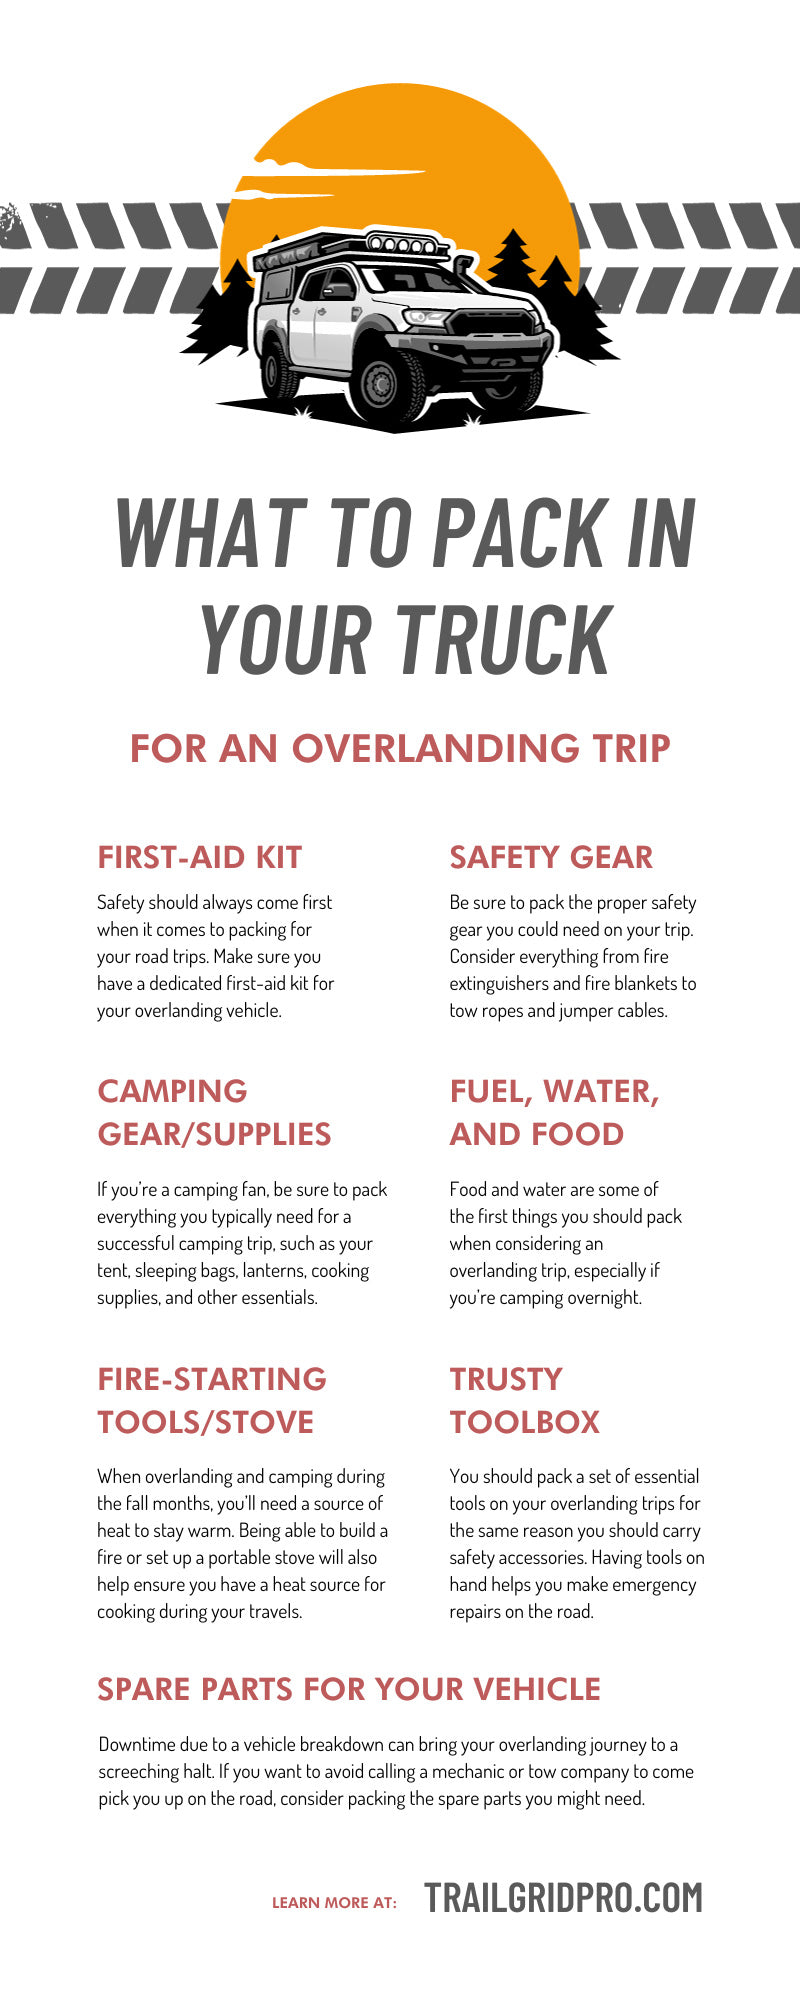 What To Pack in Your Truck for an Overlanding Trip